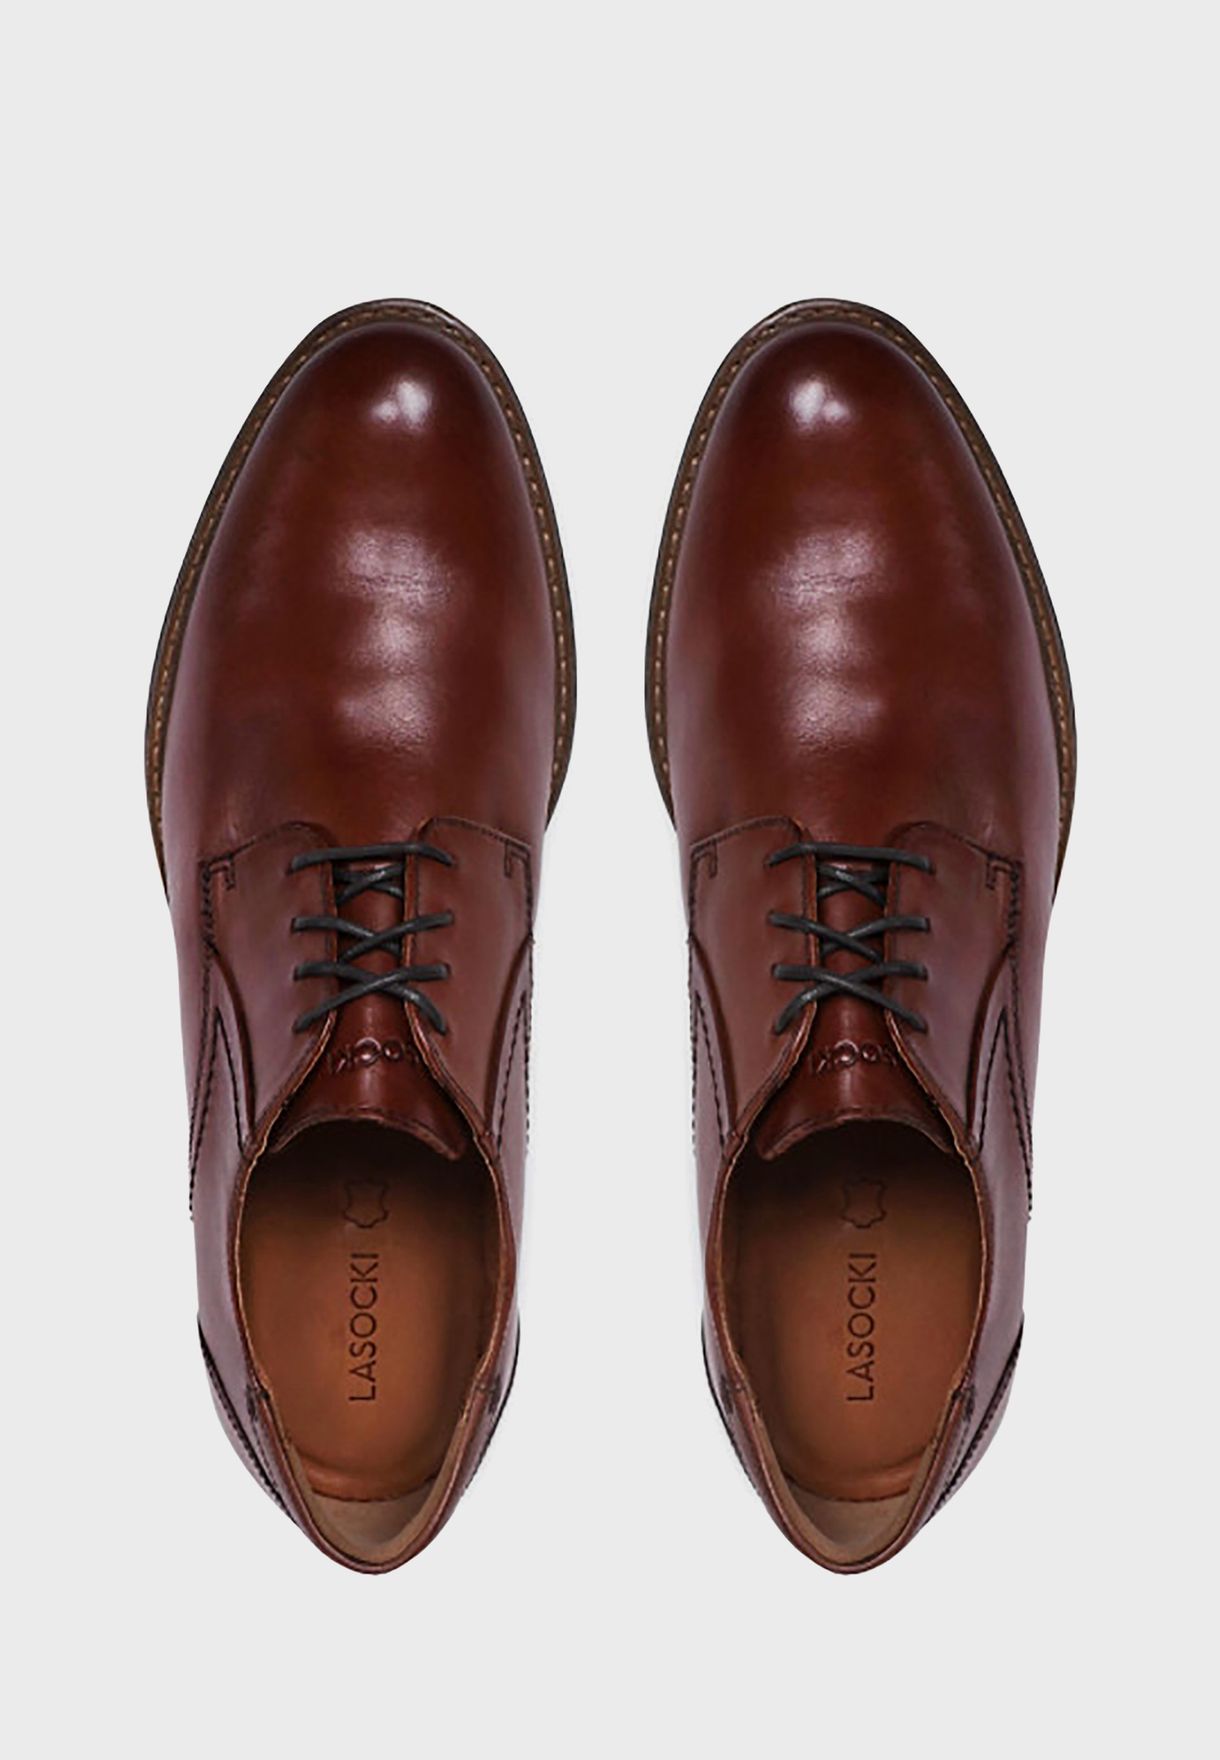 Formal Lace Ups